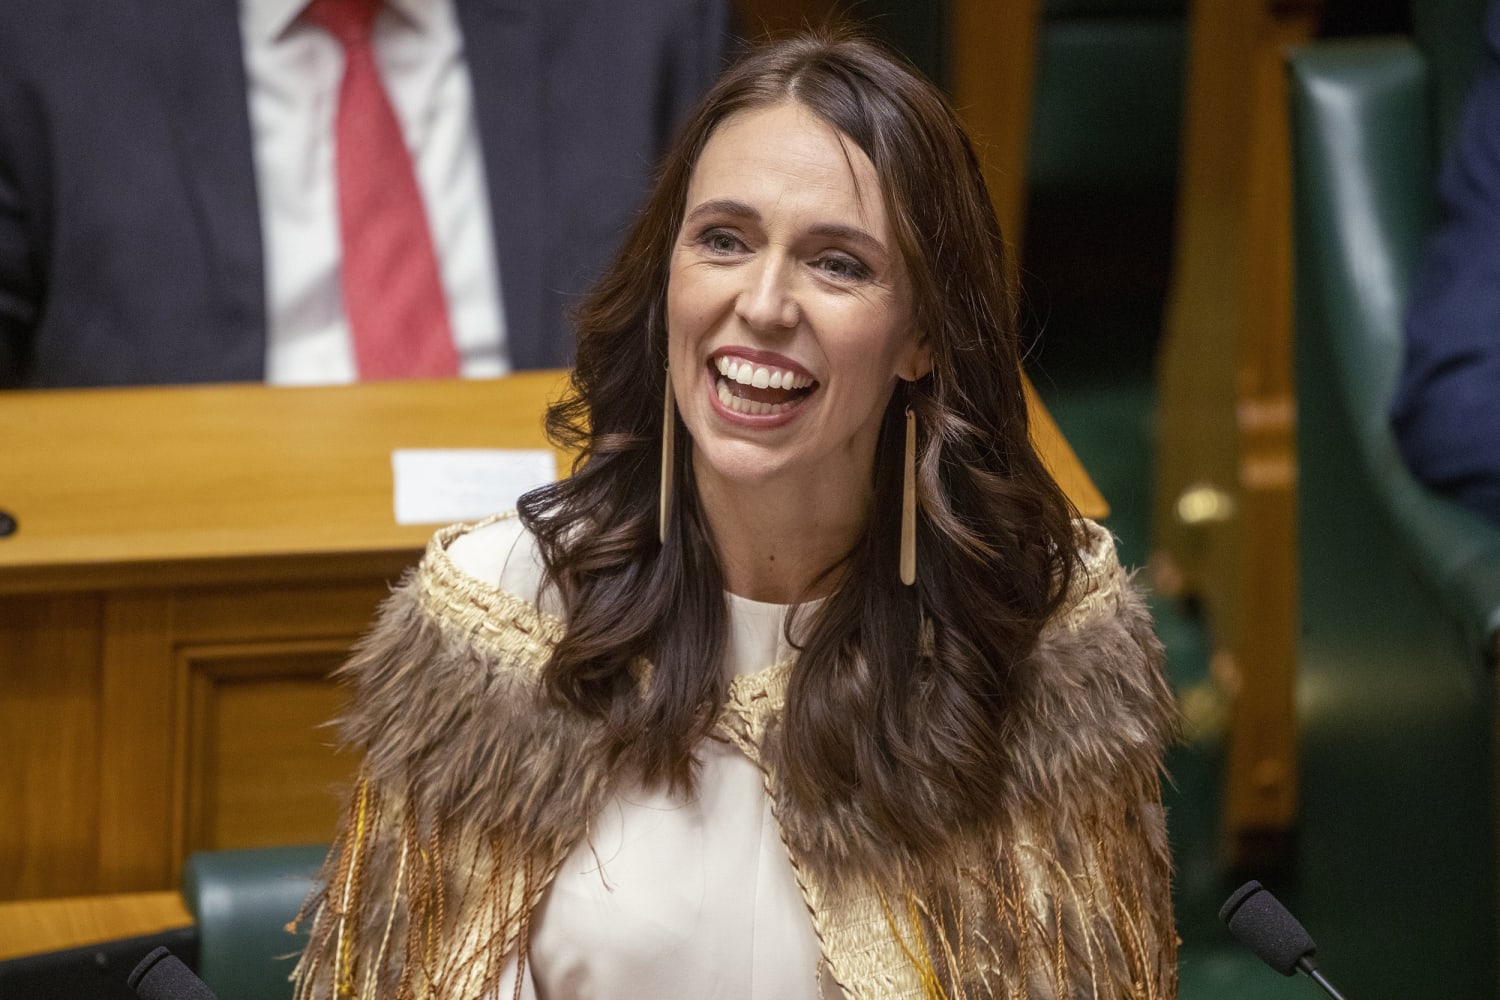 ‘You can lead just like me,’ Jacinda Ardern says in final speech to New Zealand Parliament